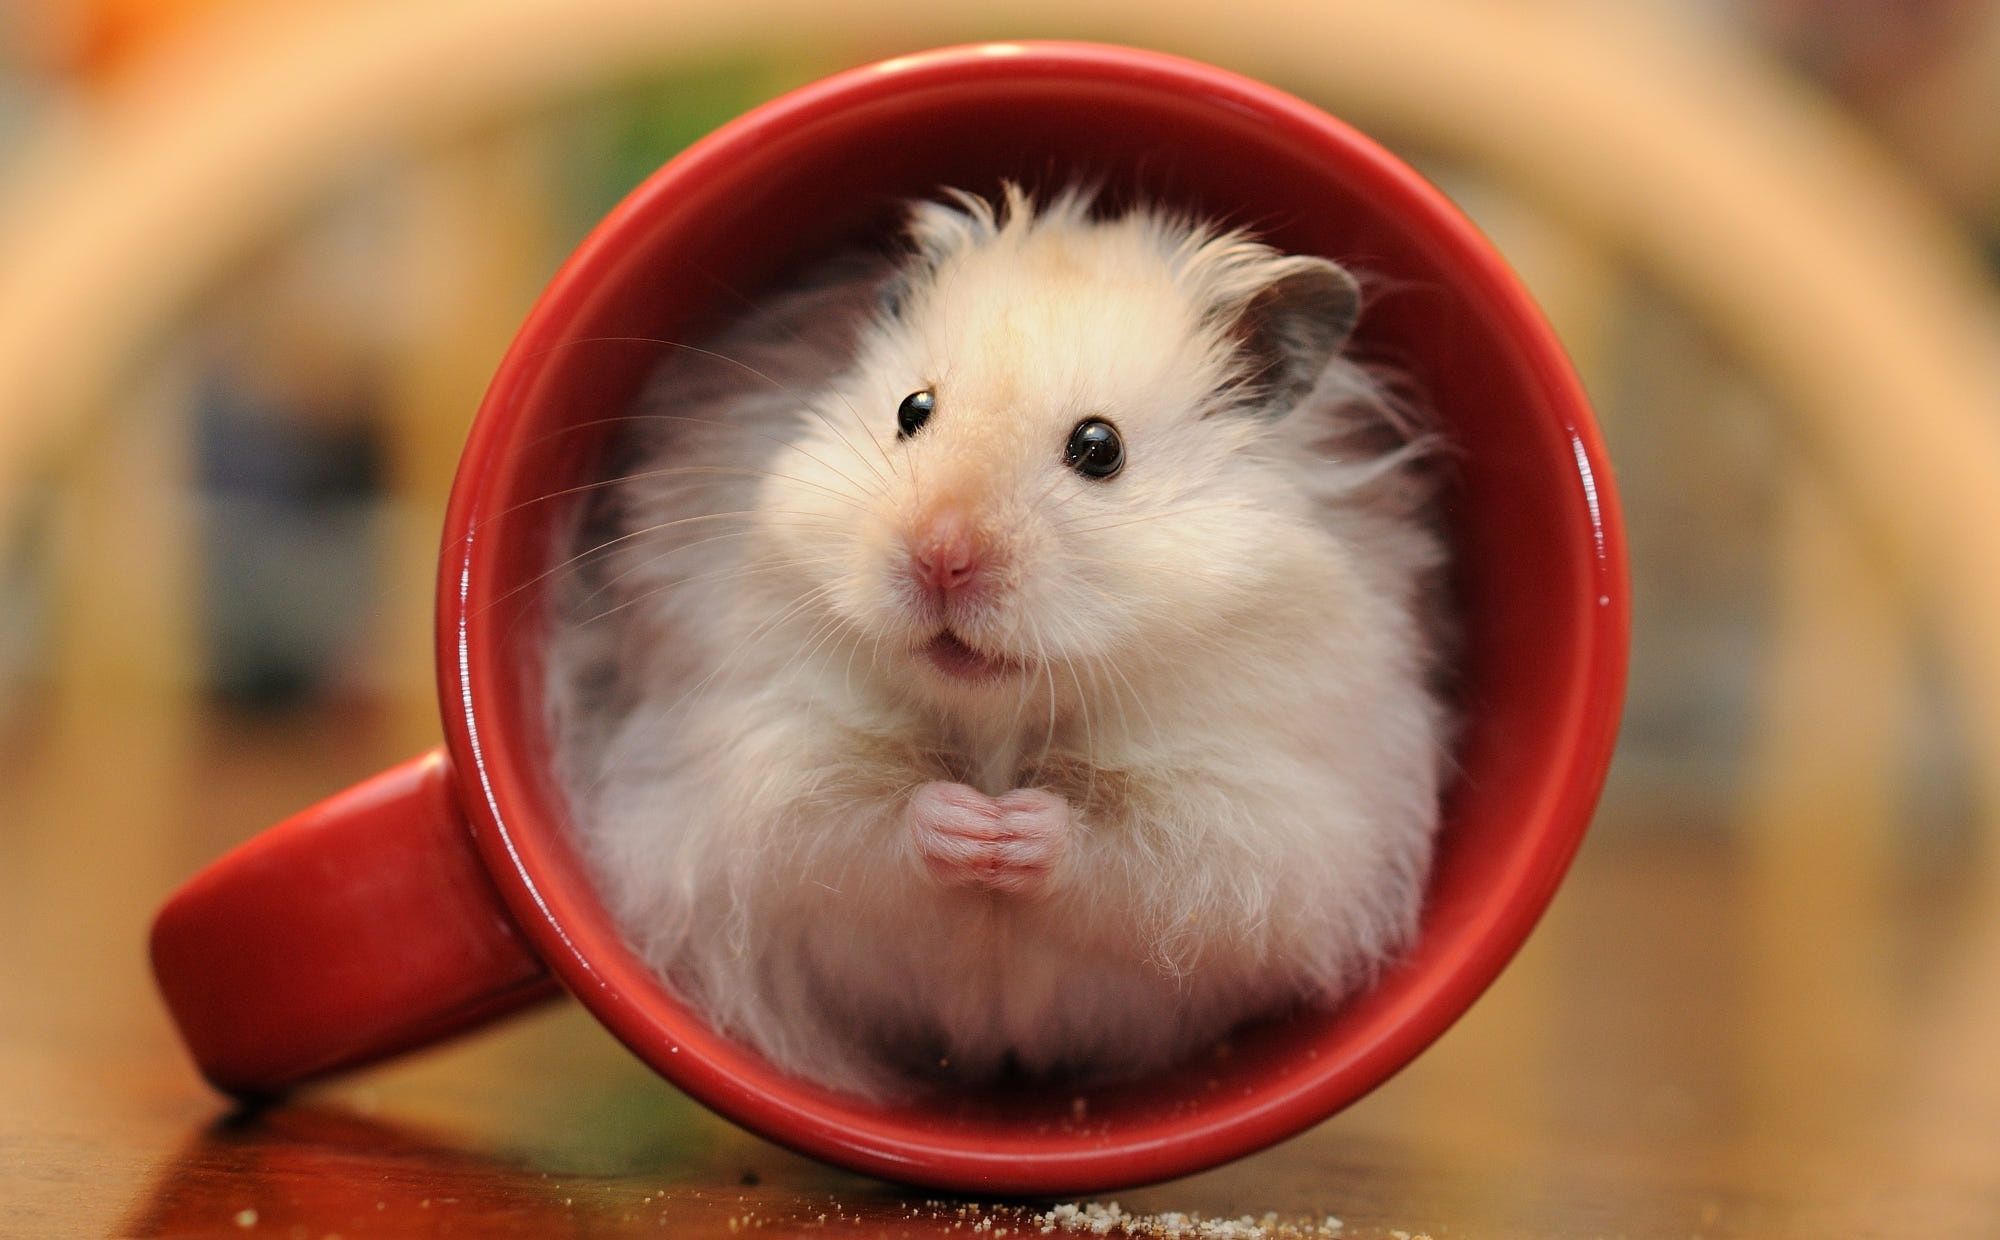 HD hamster wallpapers, Adorable and furry, Curious little creatures, Cute hamster moments, 2000x1240 HD Desktop